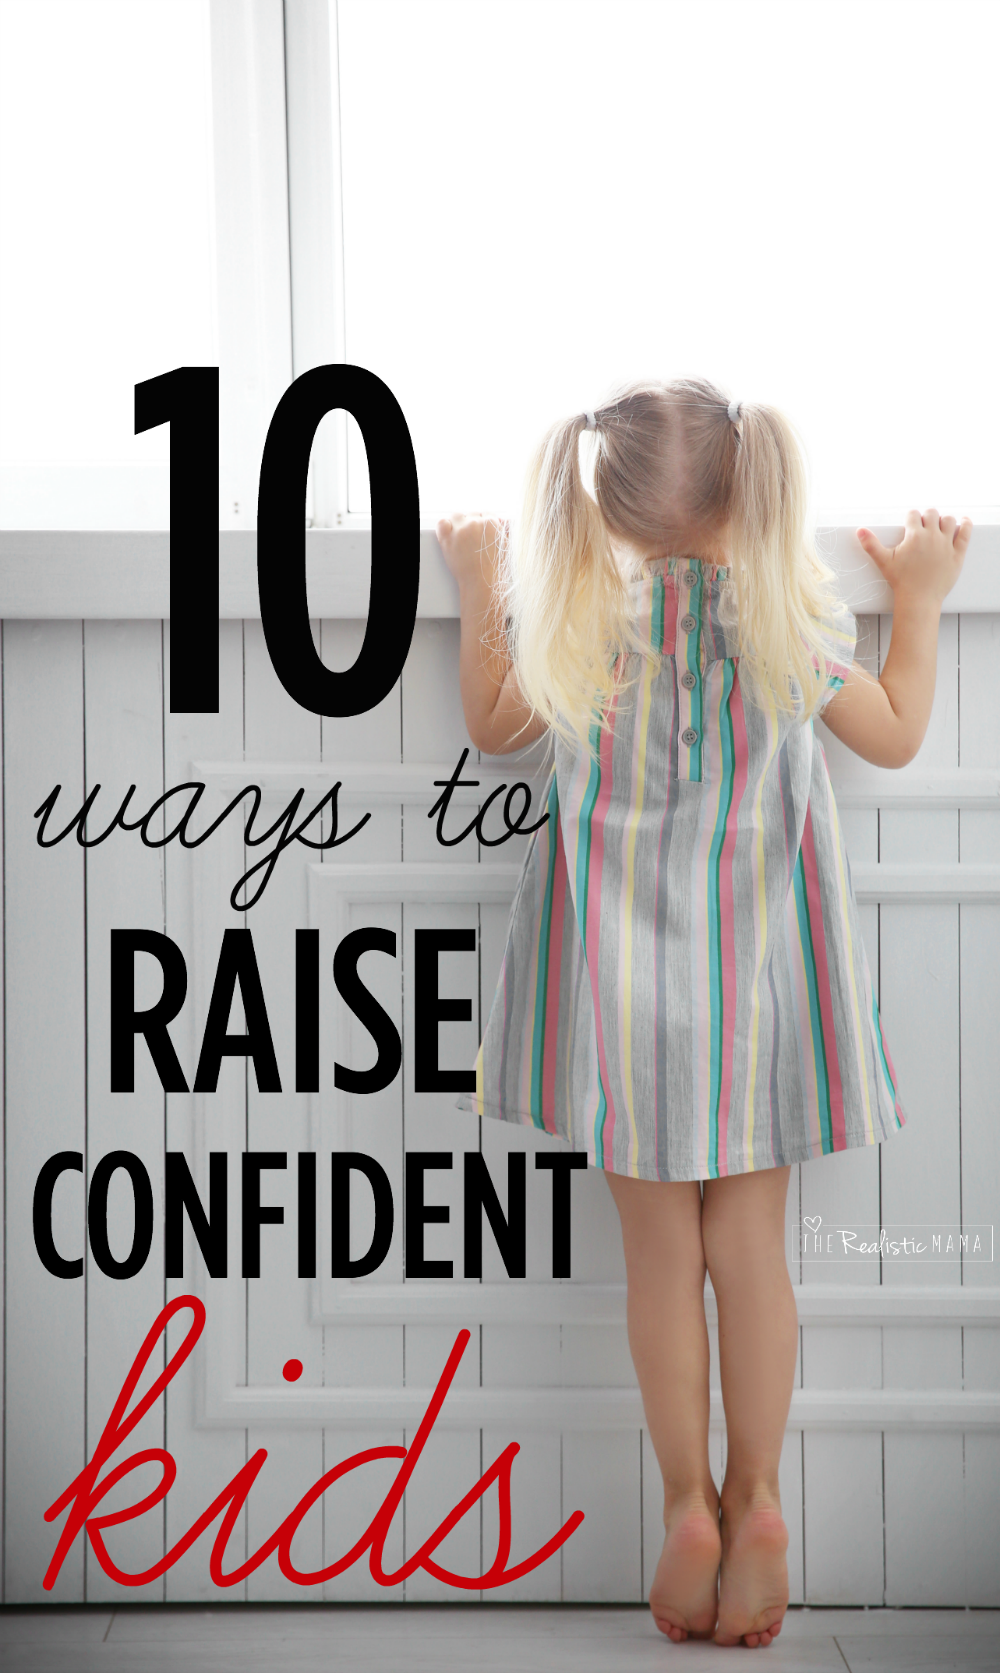 10 ways to raise confident kids - great parenting tips